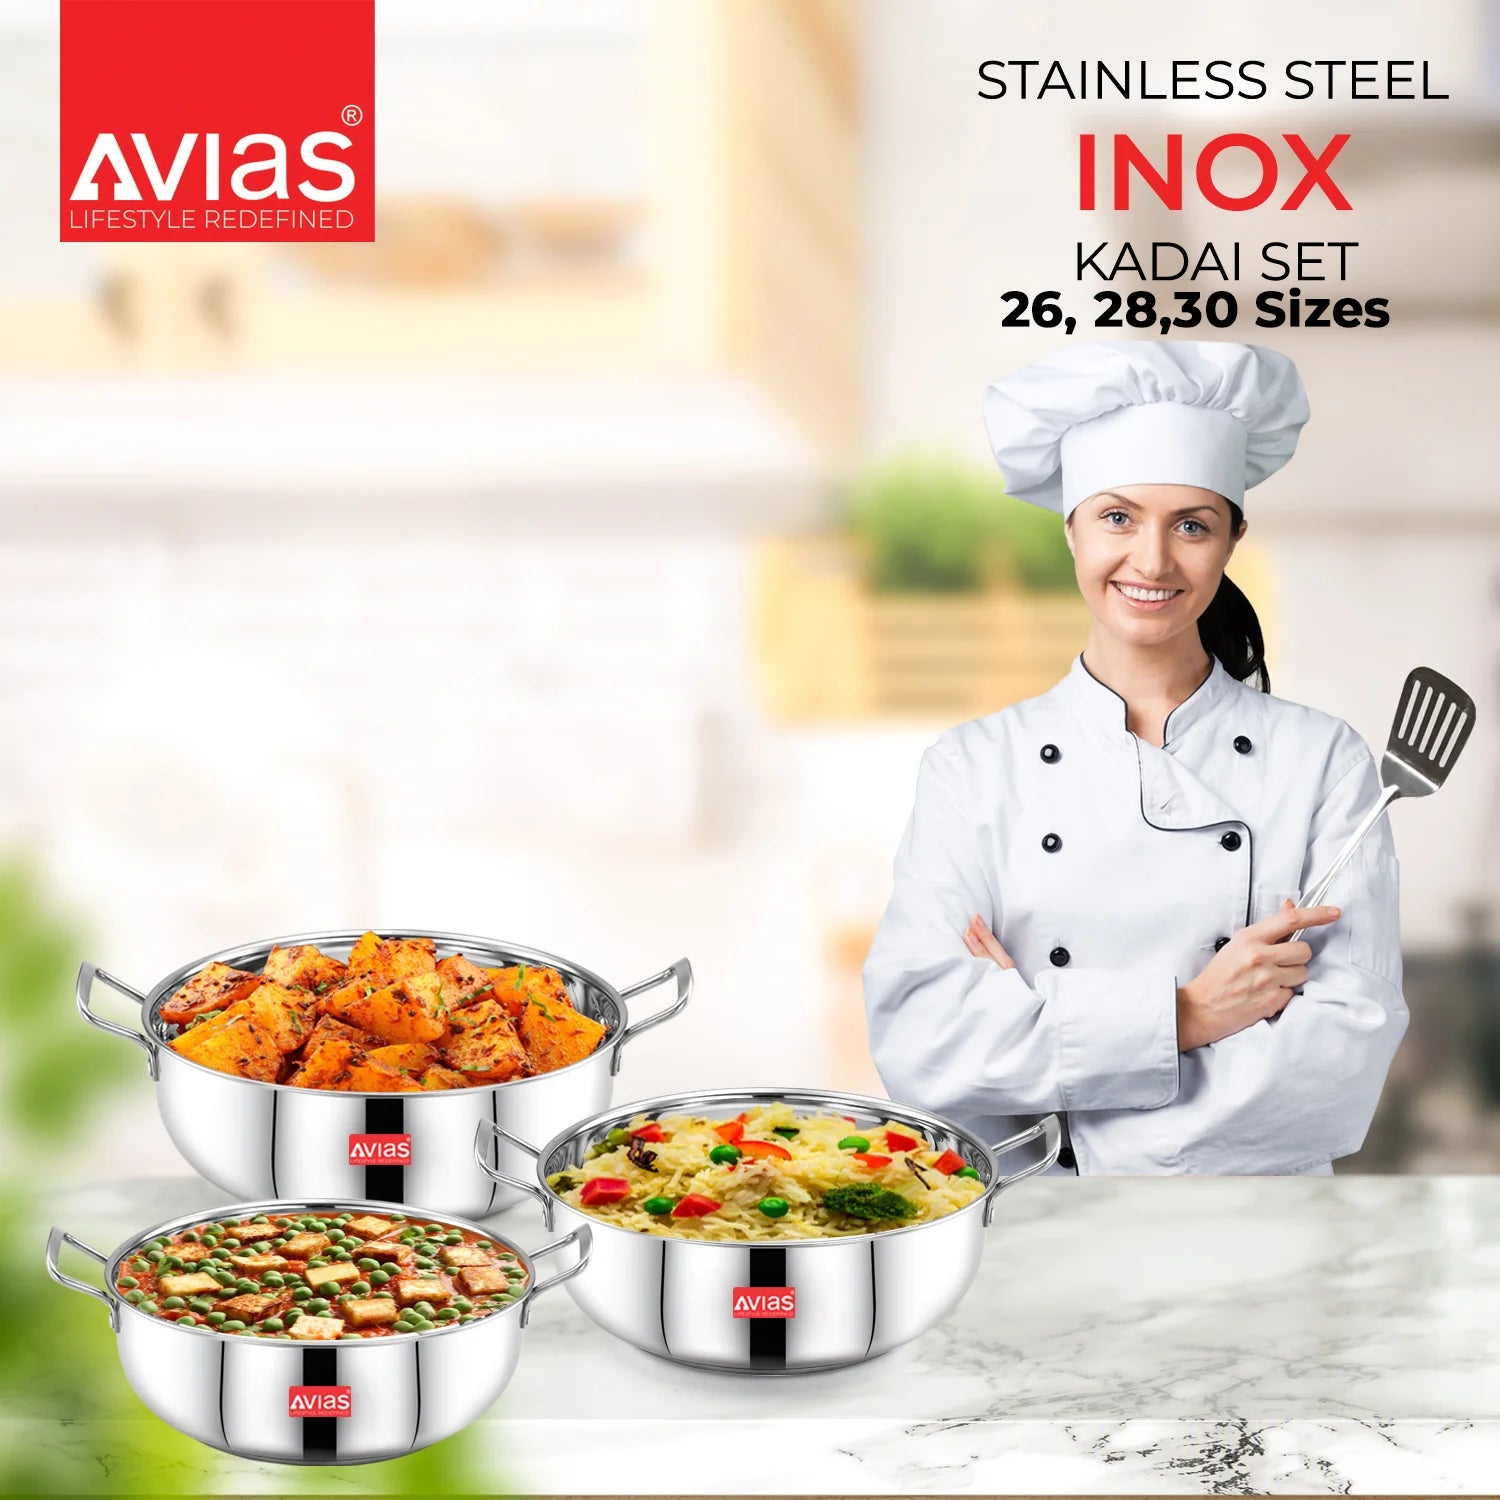 AVIAS Inox IB stainless steel kadai for ooking quality food in kitchen